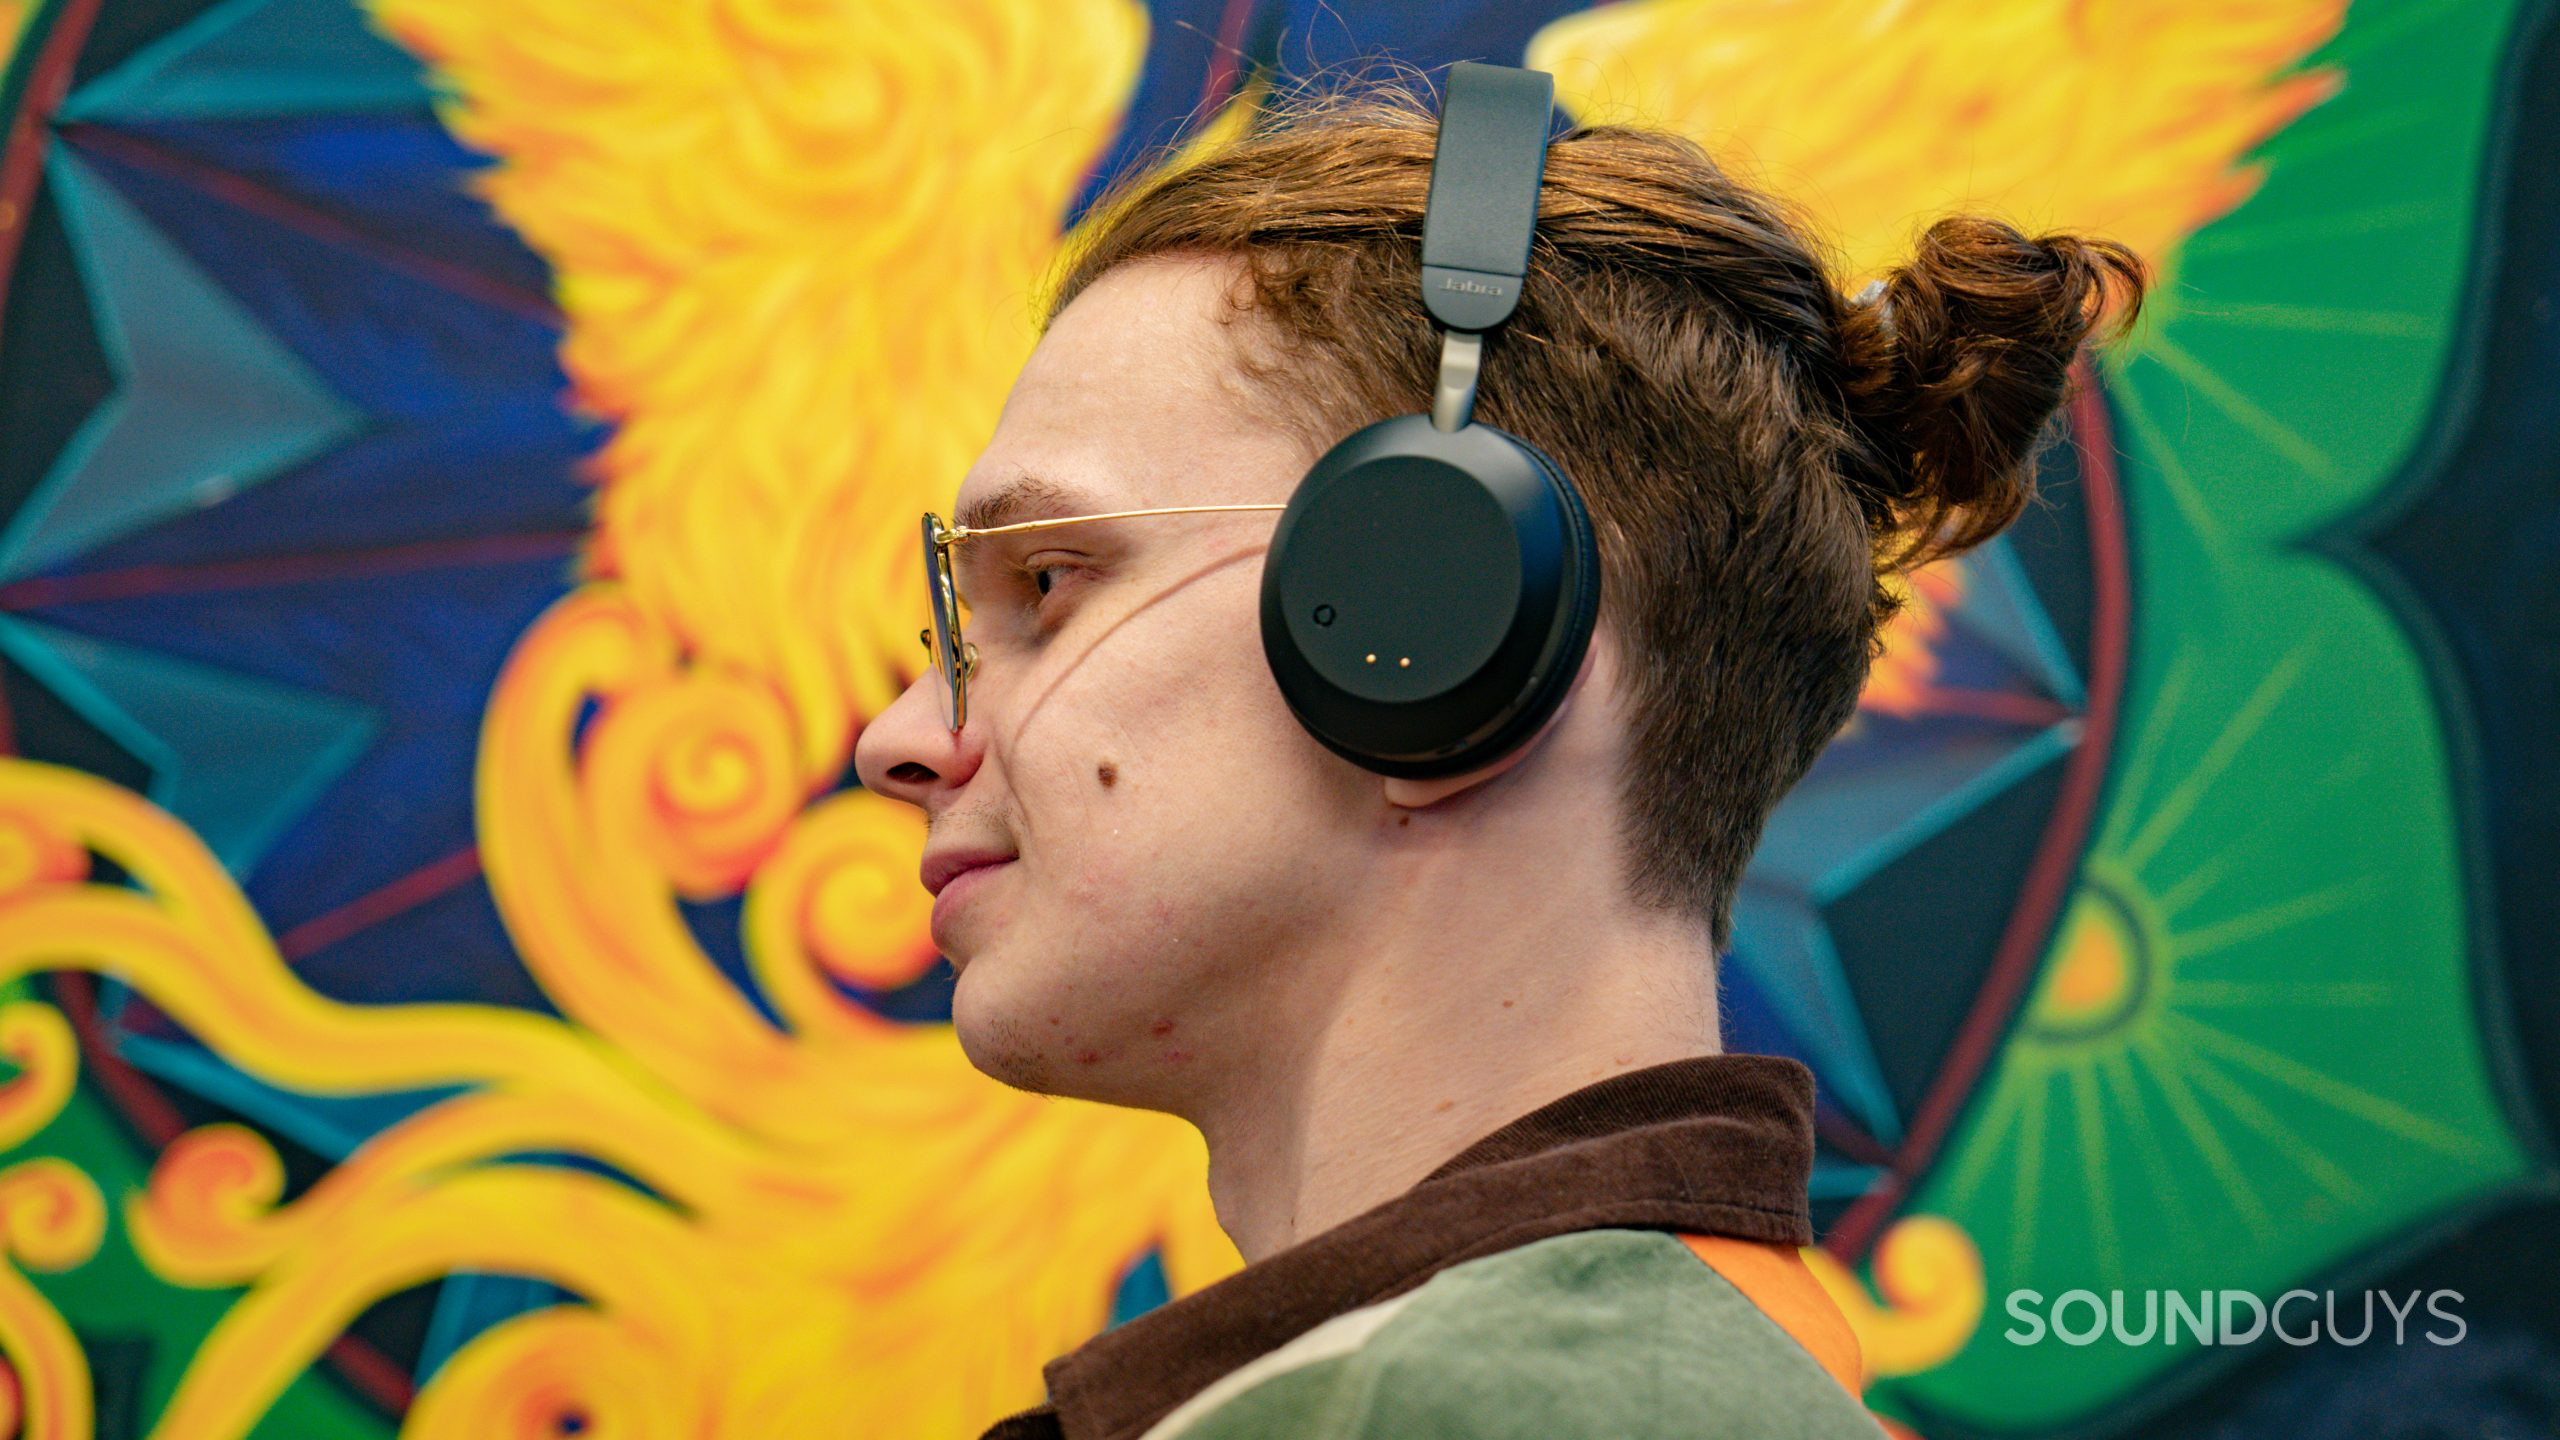 The Jabra Evolve2 75 being worn on an individual's head against a colourful background.